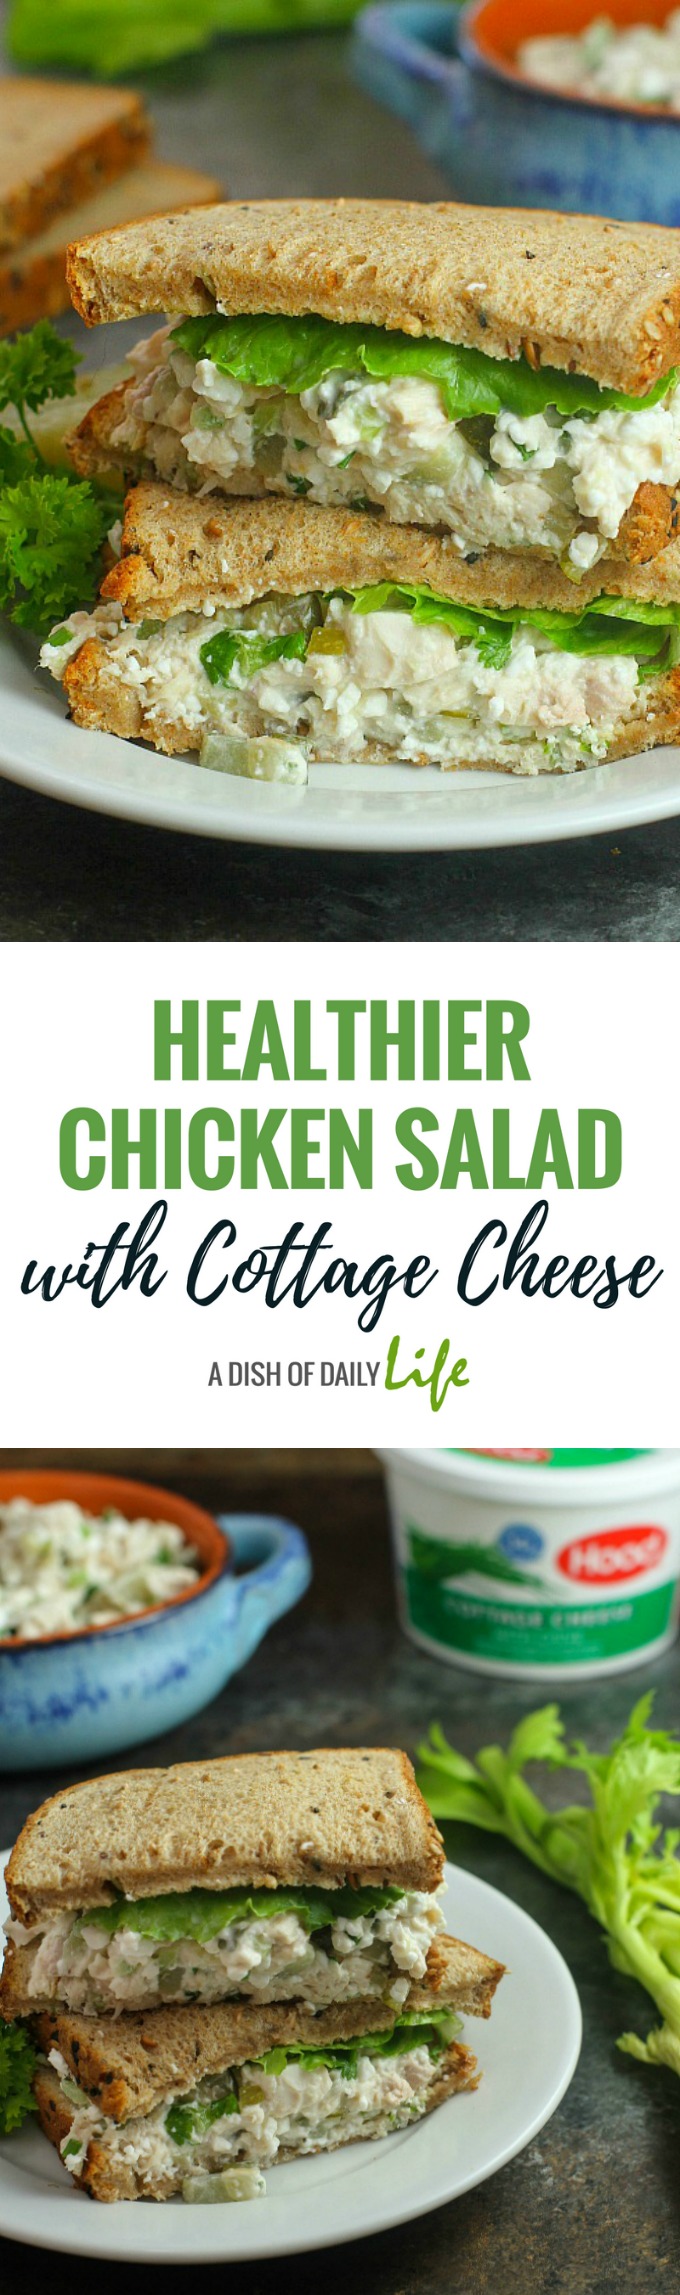 This delicious traditional chicken salad recipe gets an added boost of protein from cottage cheese. Your family will love this healthy makeover. Perfect for lunch or a post workout snack!